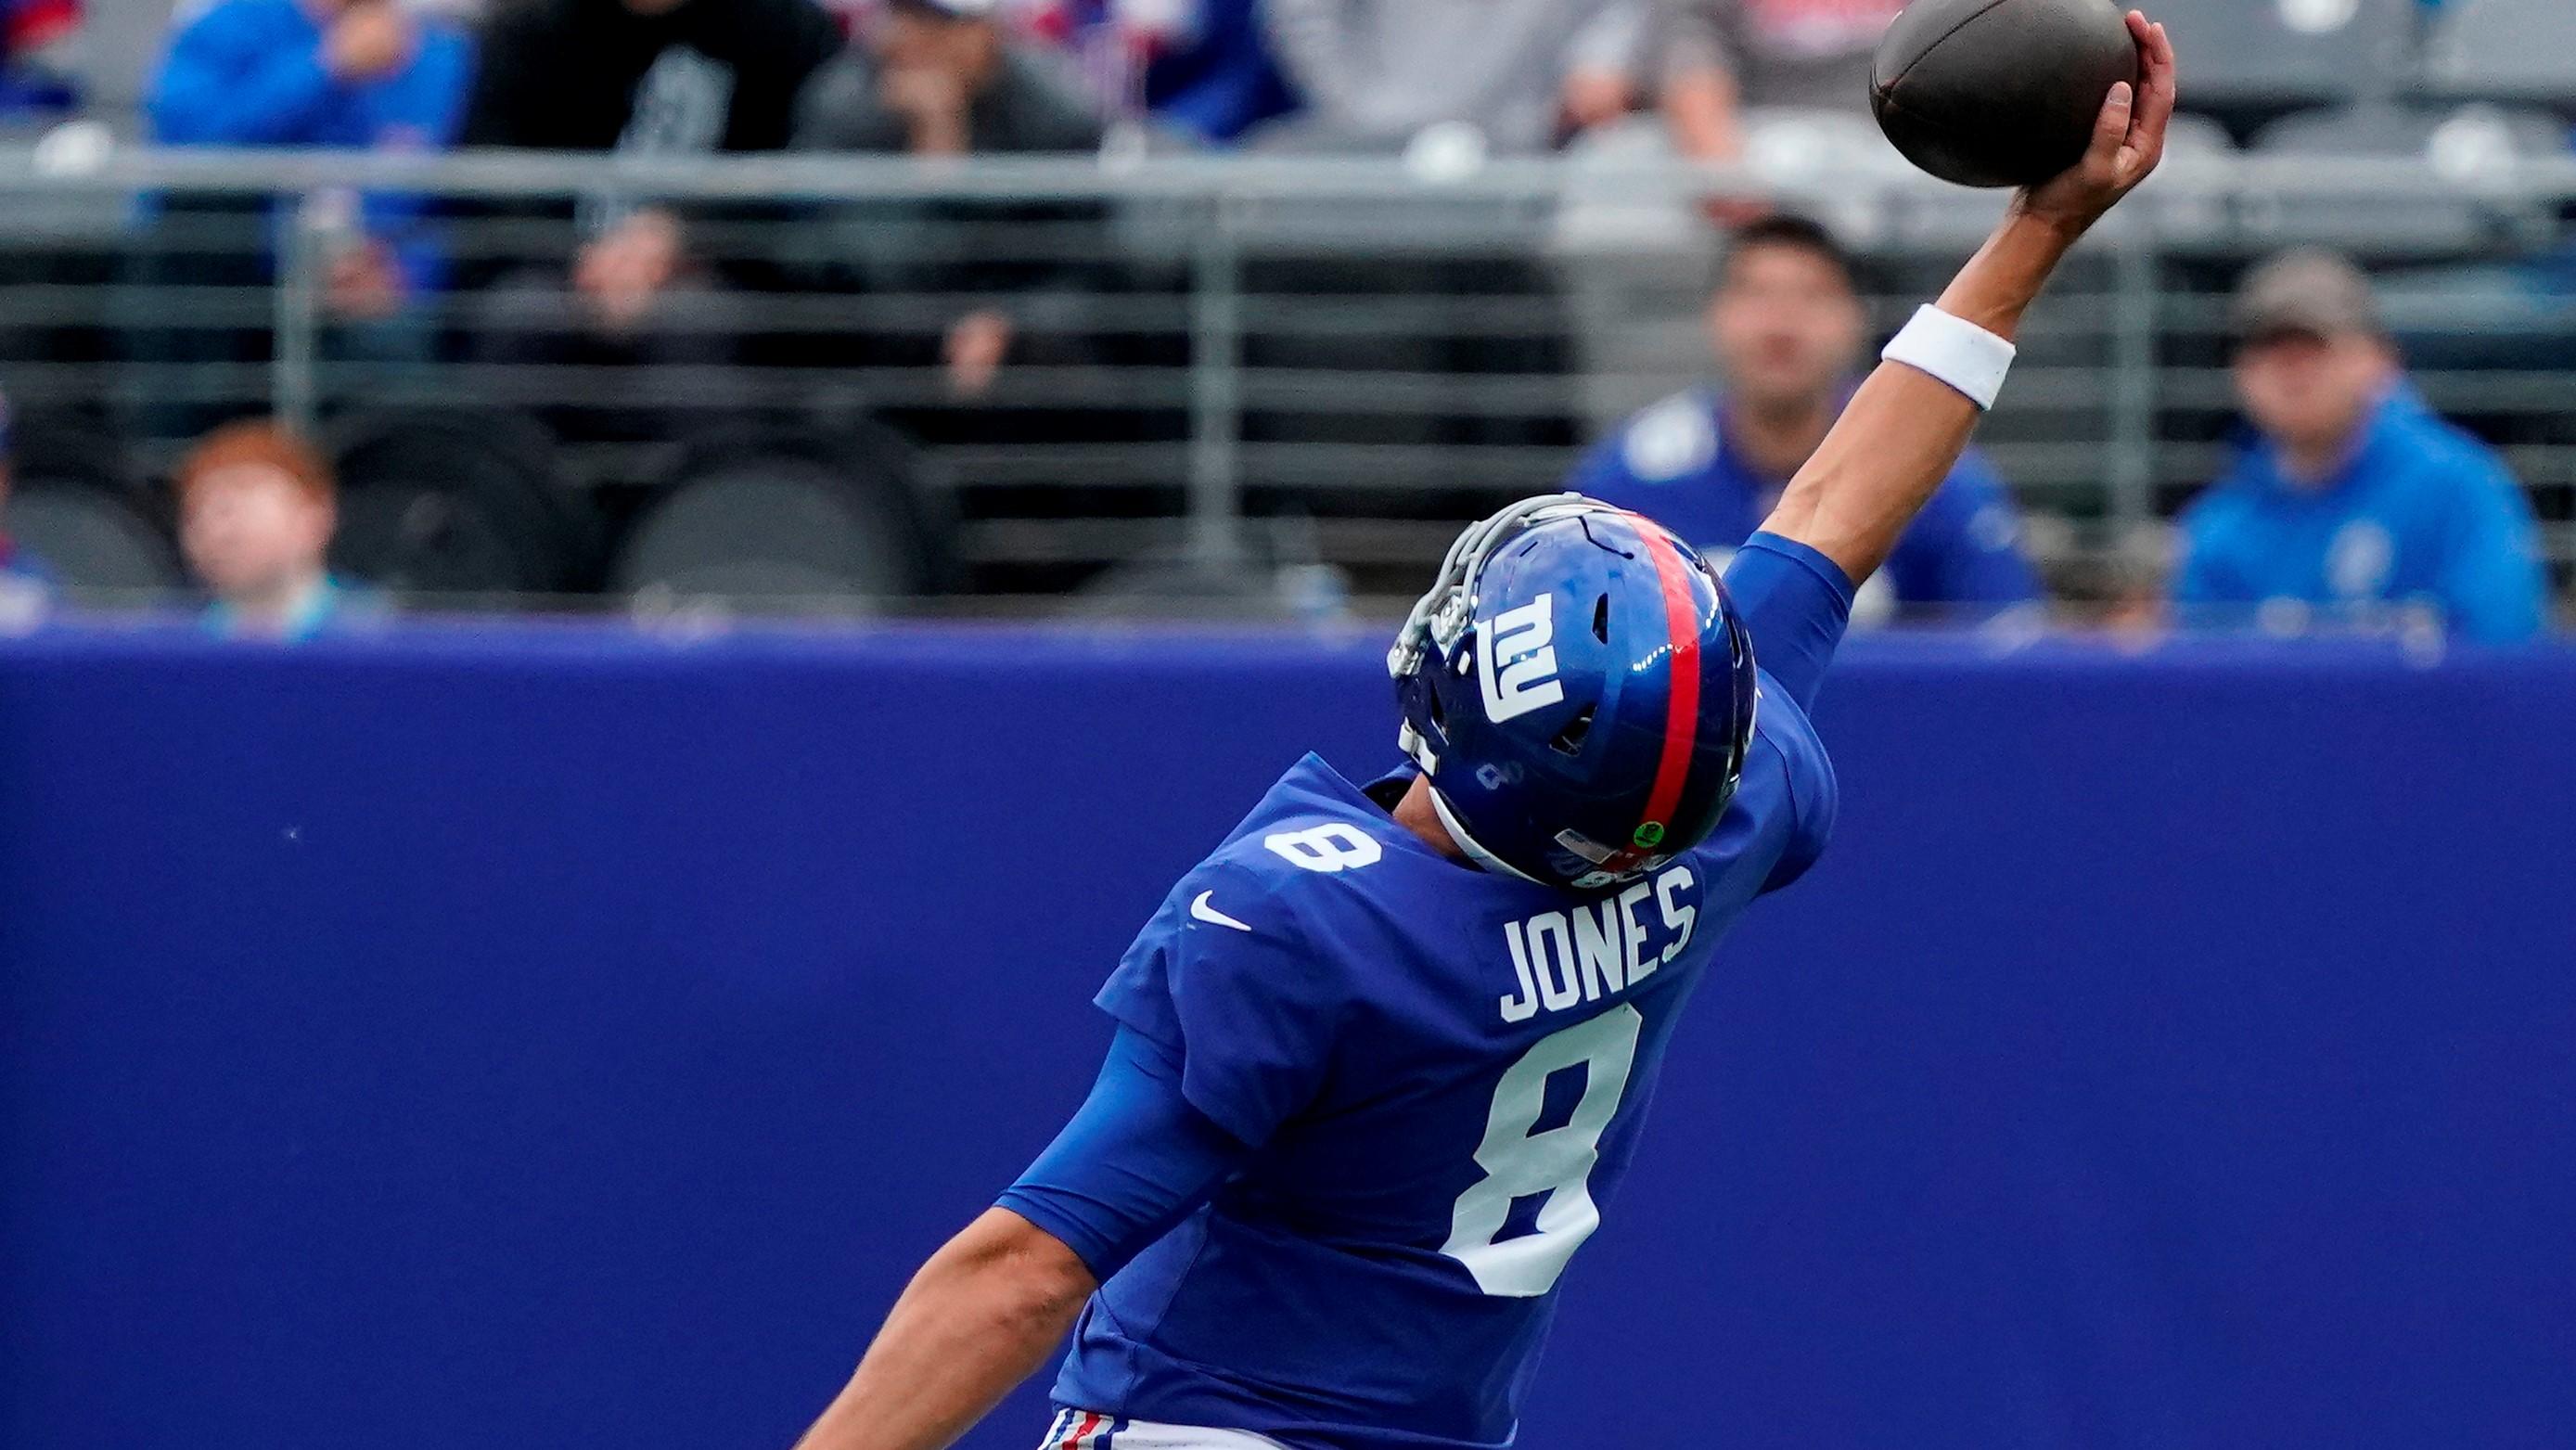 Oct 24, 2021; East Rutherford, NJ, USA; New York Giants quarterback Daniel Jones (8) catches a pass on a trick play against the Carolina Panthers at MetLife Stadium. Mandatory Credit: Robert Deutsch-USA TODAY Sports / Robert Deutsch-USA TODAY Sports